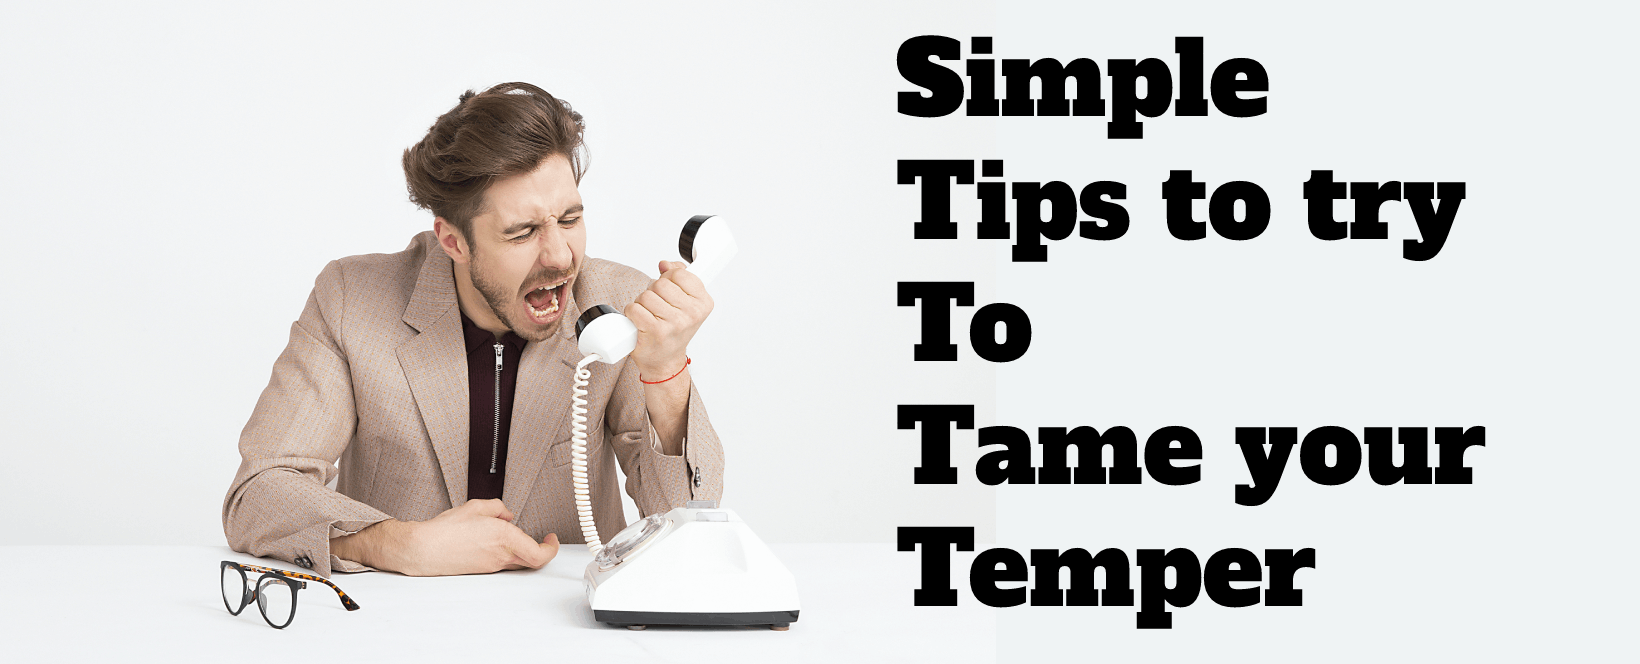 Simple tips to try to tame your temper